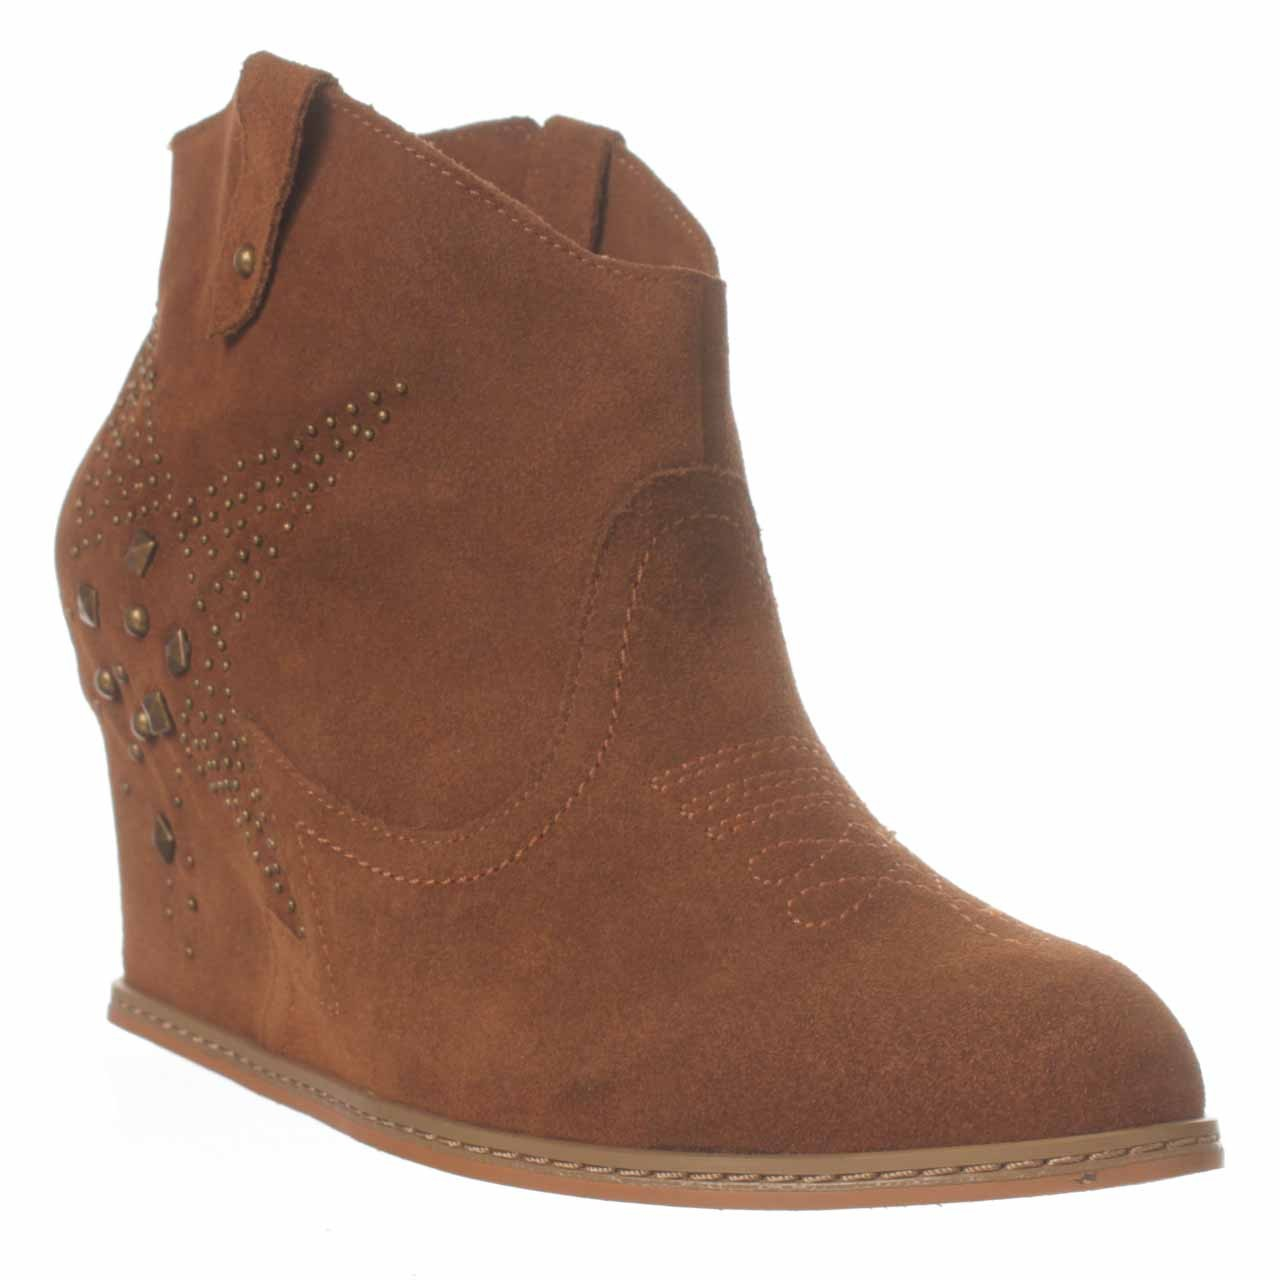 Naughty monkey Giddy Up Ankle Bootie in Brown | Lyst